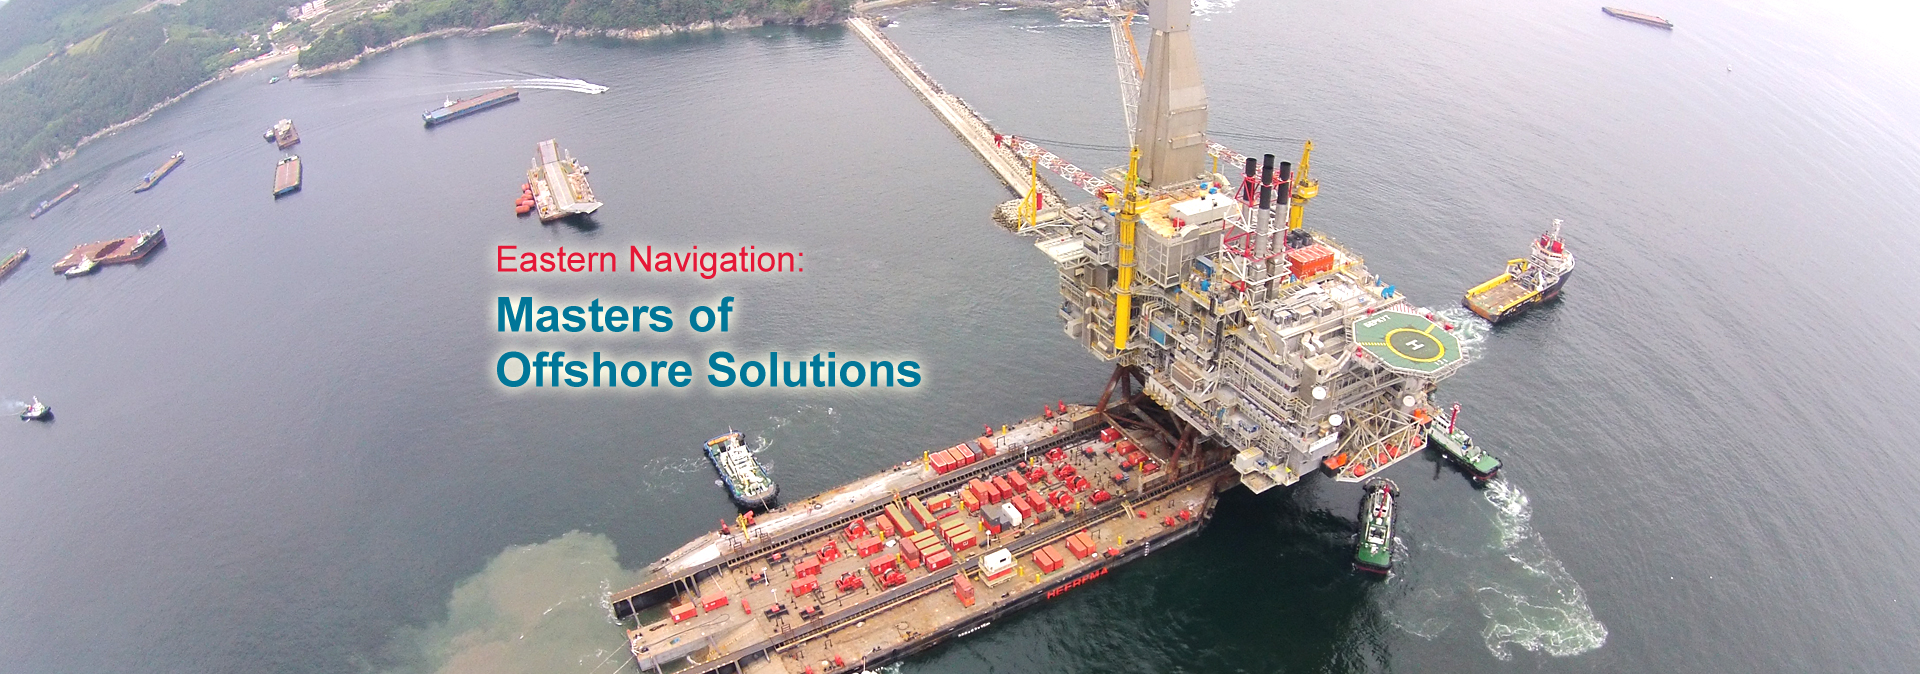 https://easternnavigation.com/our-solutions/our-capabilities/